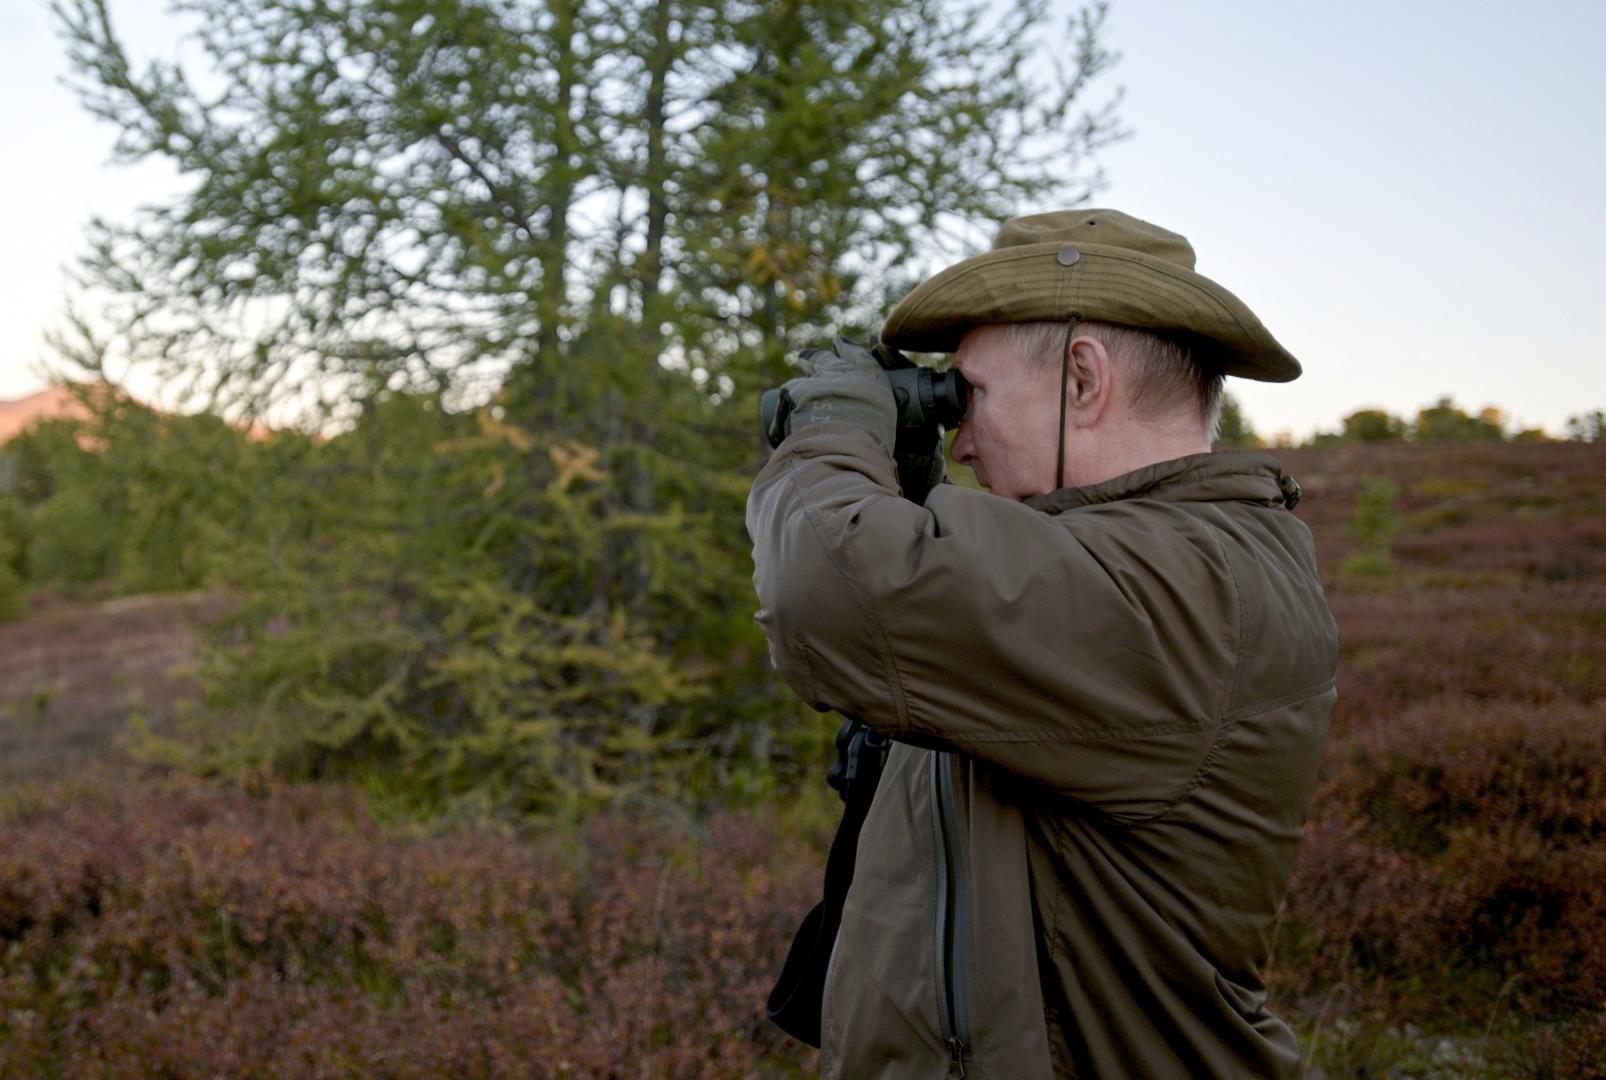 Russian President Vladimir Putin spends vacations in Siberia Russian President Vladimir Putin looks through binoculars during a short vacation at an unknown location in Siberia, Russia, in this undated photo taken in September 2021 and released September 26, 2021. Sputnik/Alexei Druzhinin/Kremlin via REUTERS  ATTENTION EDITORS - THIS IMAGE WAS PROVIDED BY A THIRD PARTY. SPUTNIK